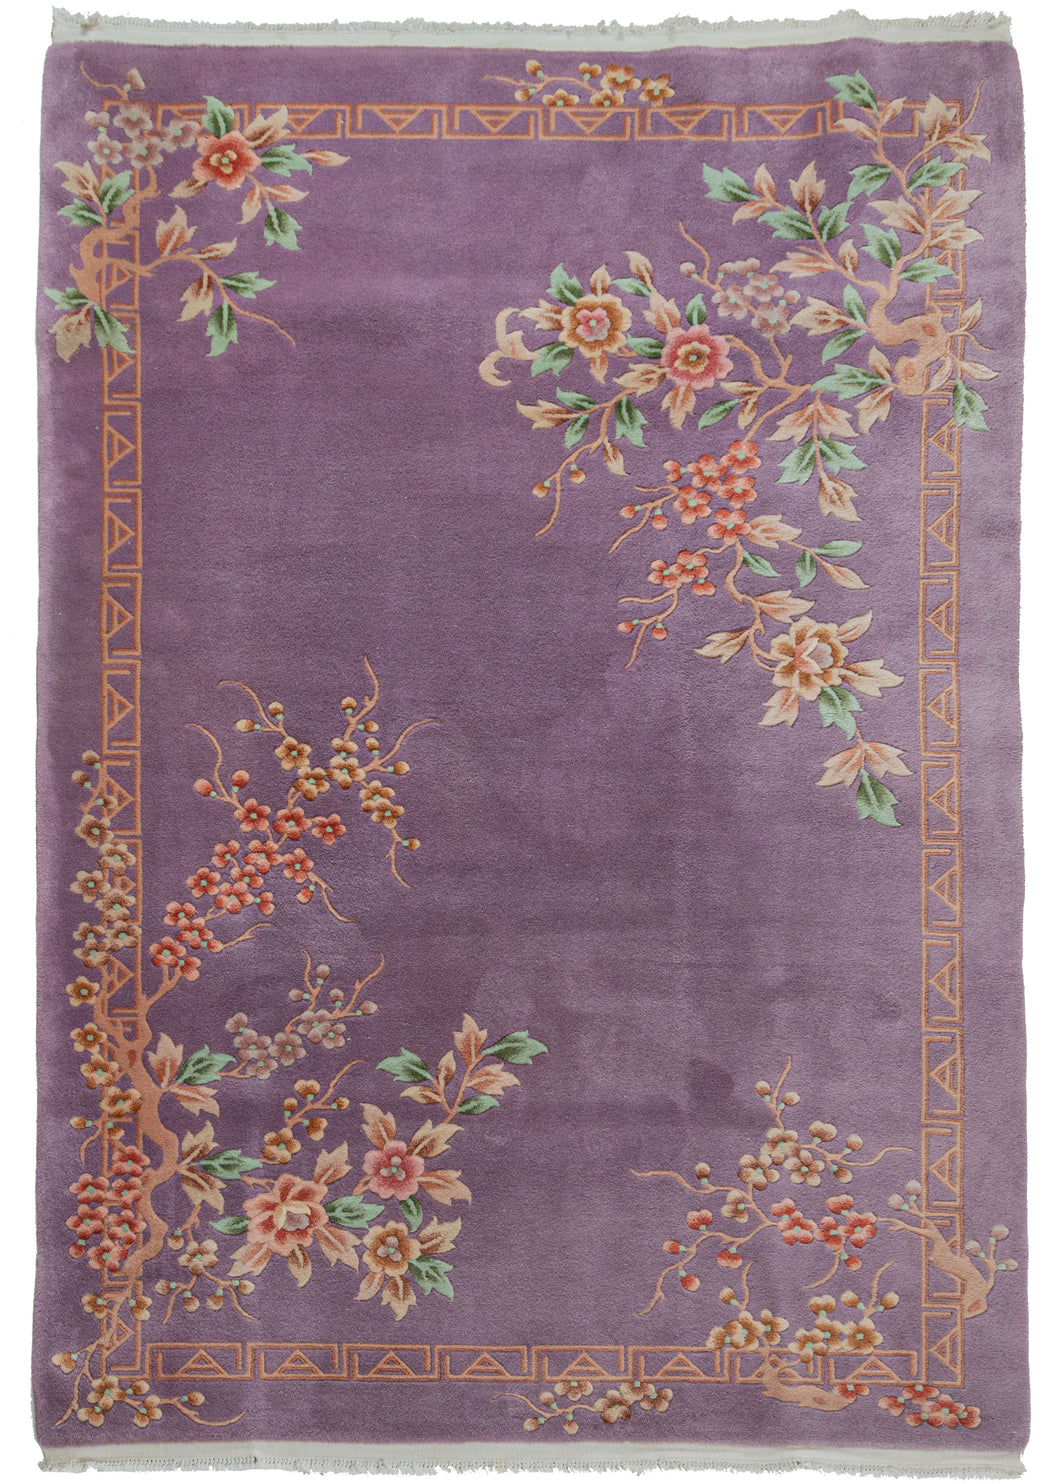 Mid century Chinese deco rug featuring a cheerful purple field. The design is open and borderless, with unique but reciprocating patterning in each corner. Each corner consists of bunches of blossoms in pinks, blues, oranges and greens. The whole is framed by an interlocking 